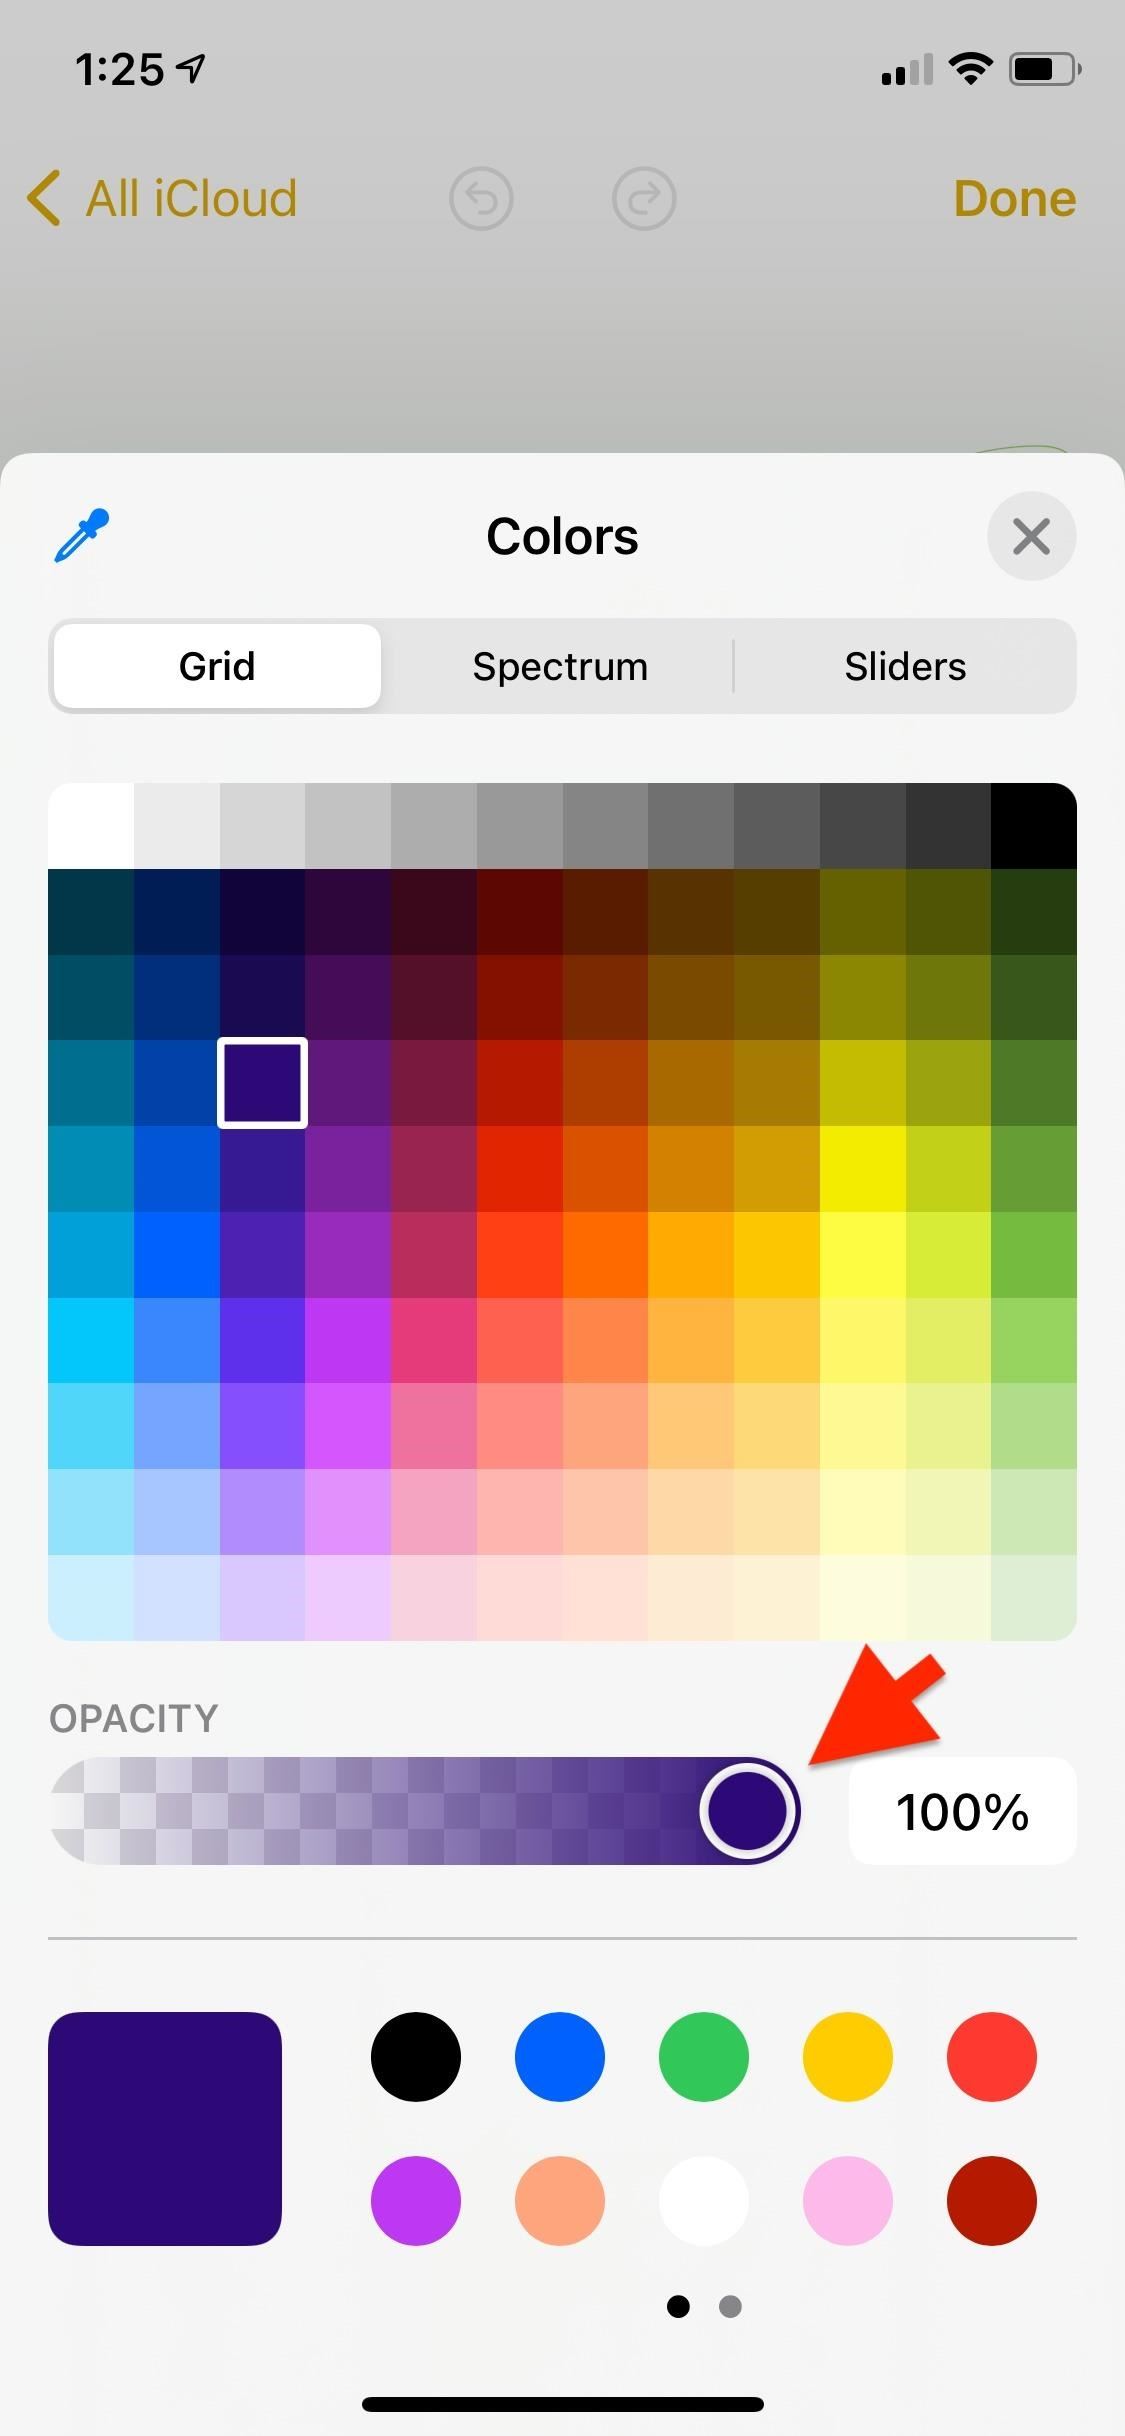 How to Choose the Perfect Hue, Shade, or Tint in Apps with iOS 14's Powerful New Color Picker Tool